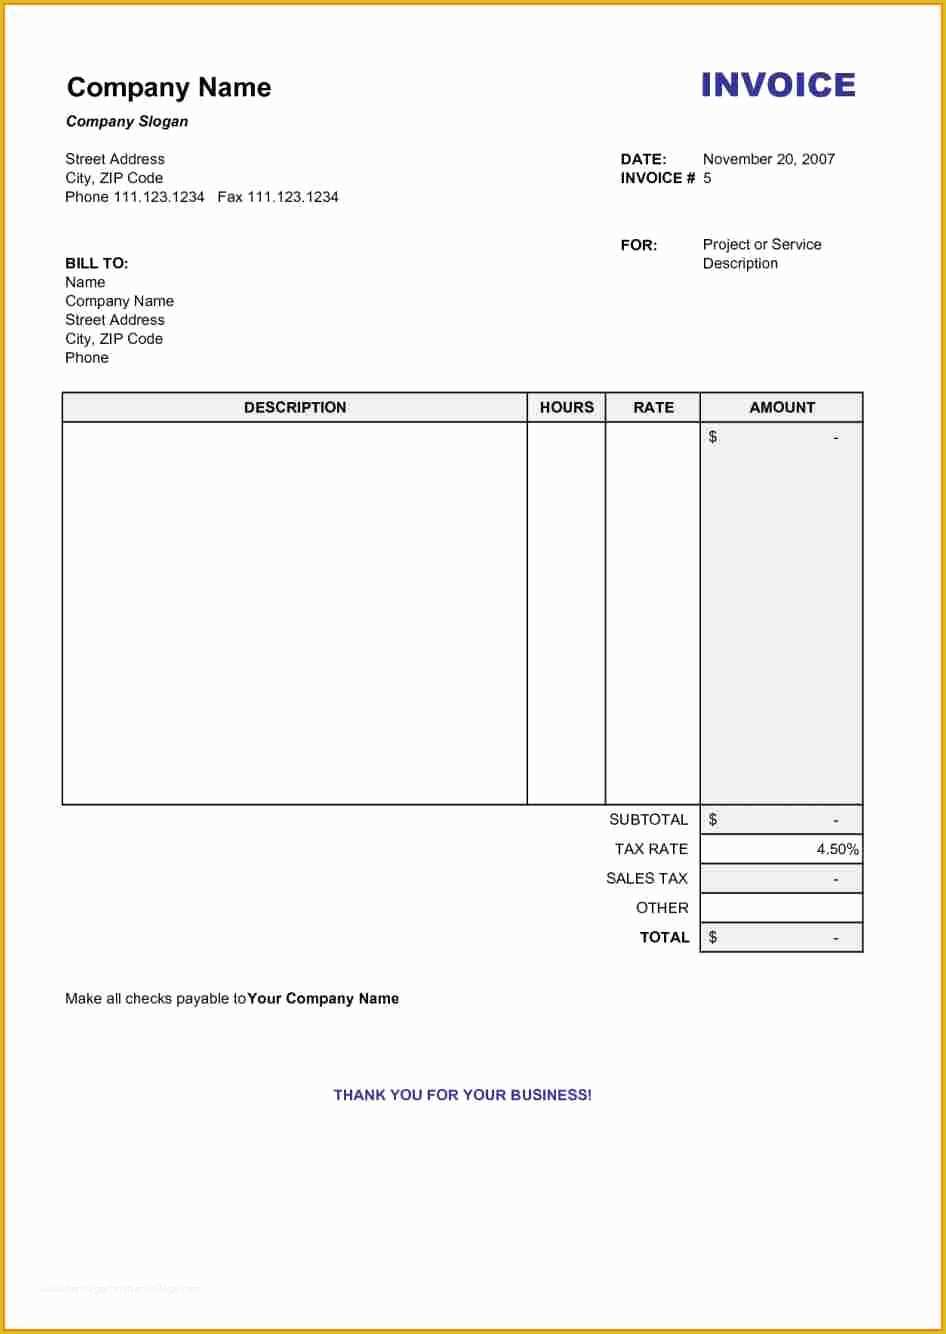 Microsoft Works Invoice Template Free Download Of 6 Hotel Blank Bill format